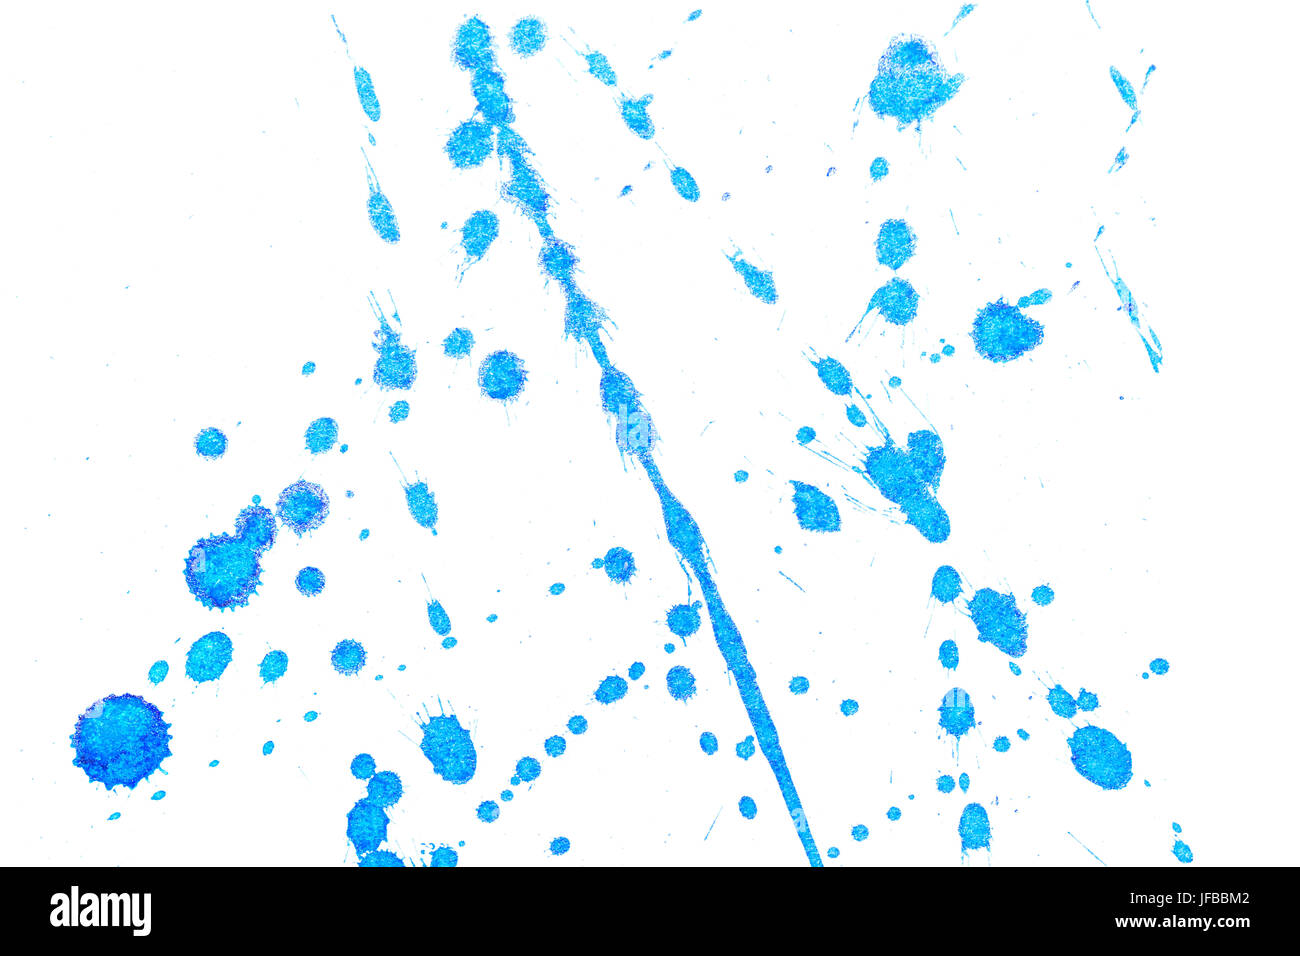 Abstract blue ink splash. Ink blots. Elements of design. Water-soluble mascara on a white sheet of paper. Abstract contemporary art. Stock Photo